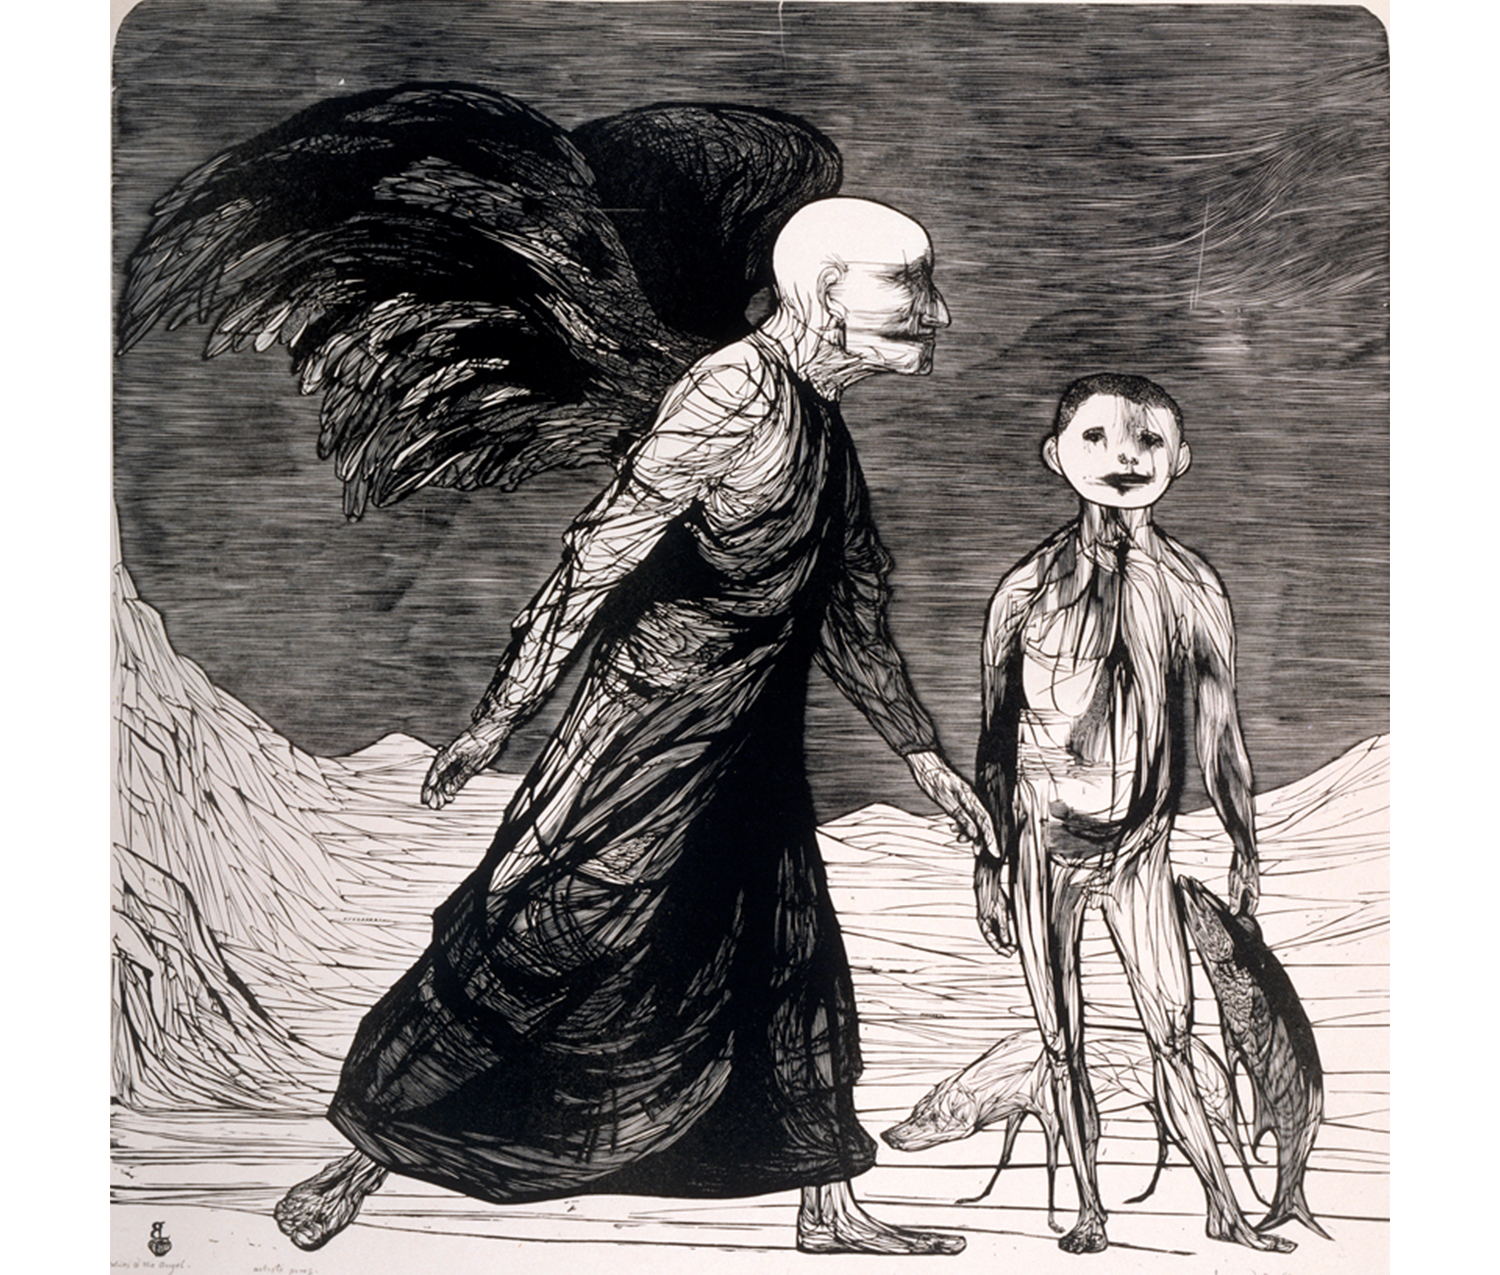 an angel with dark wings walks toward a small boy holding a fish